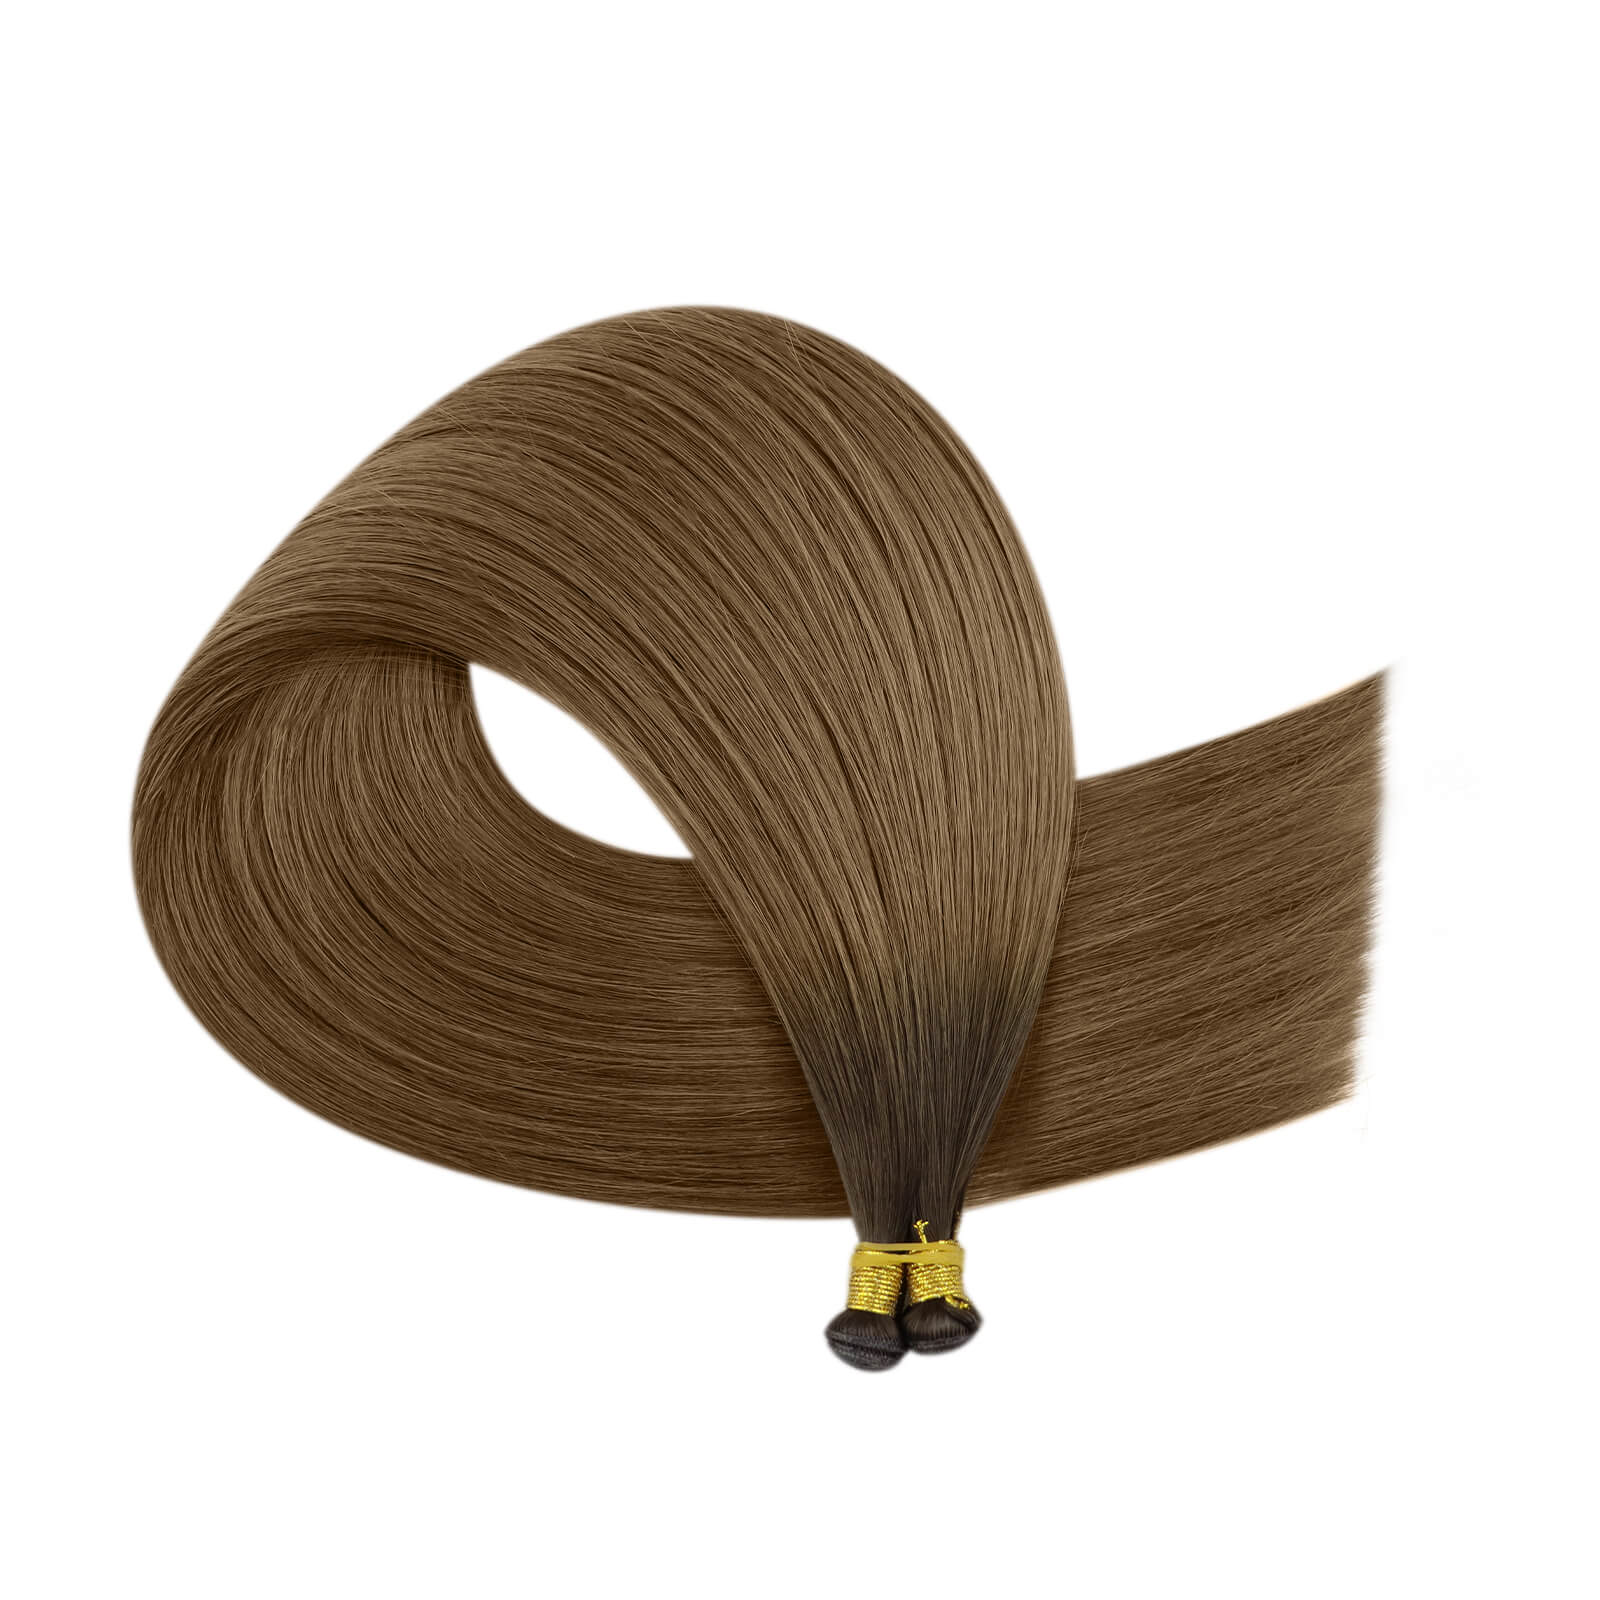 [New] Incredibly Thin Virgin Genius Hair Weft Extensions High Quality Balayage Brown #R3T8 |Youngsee